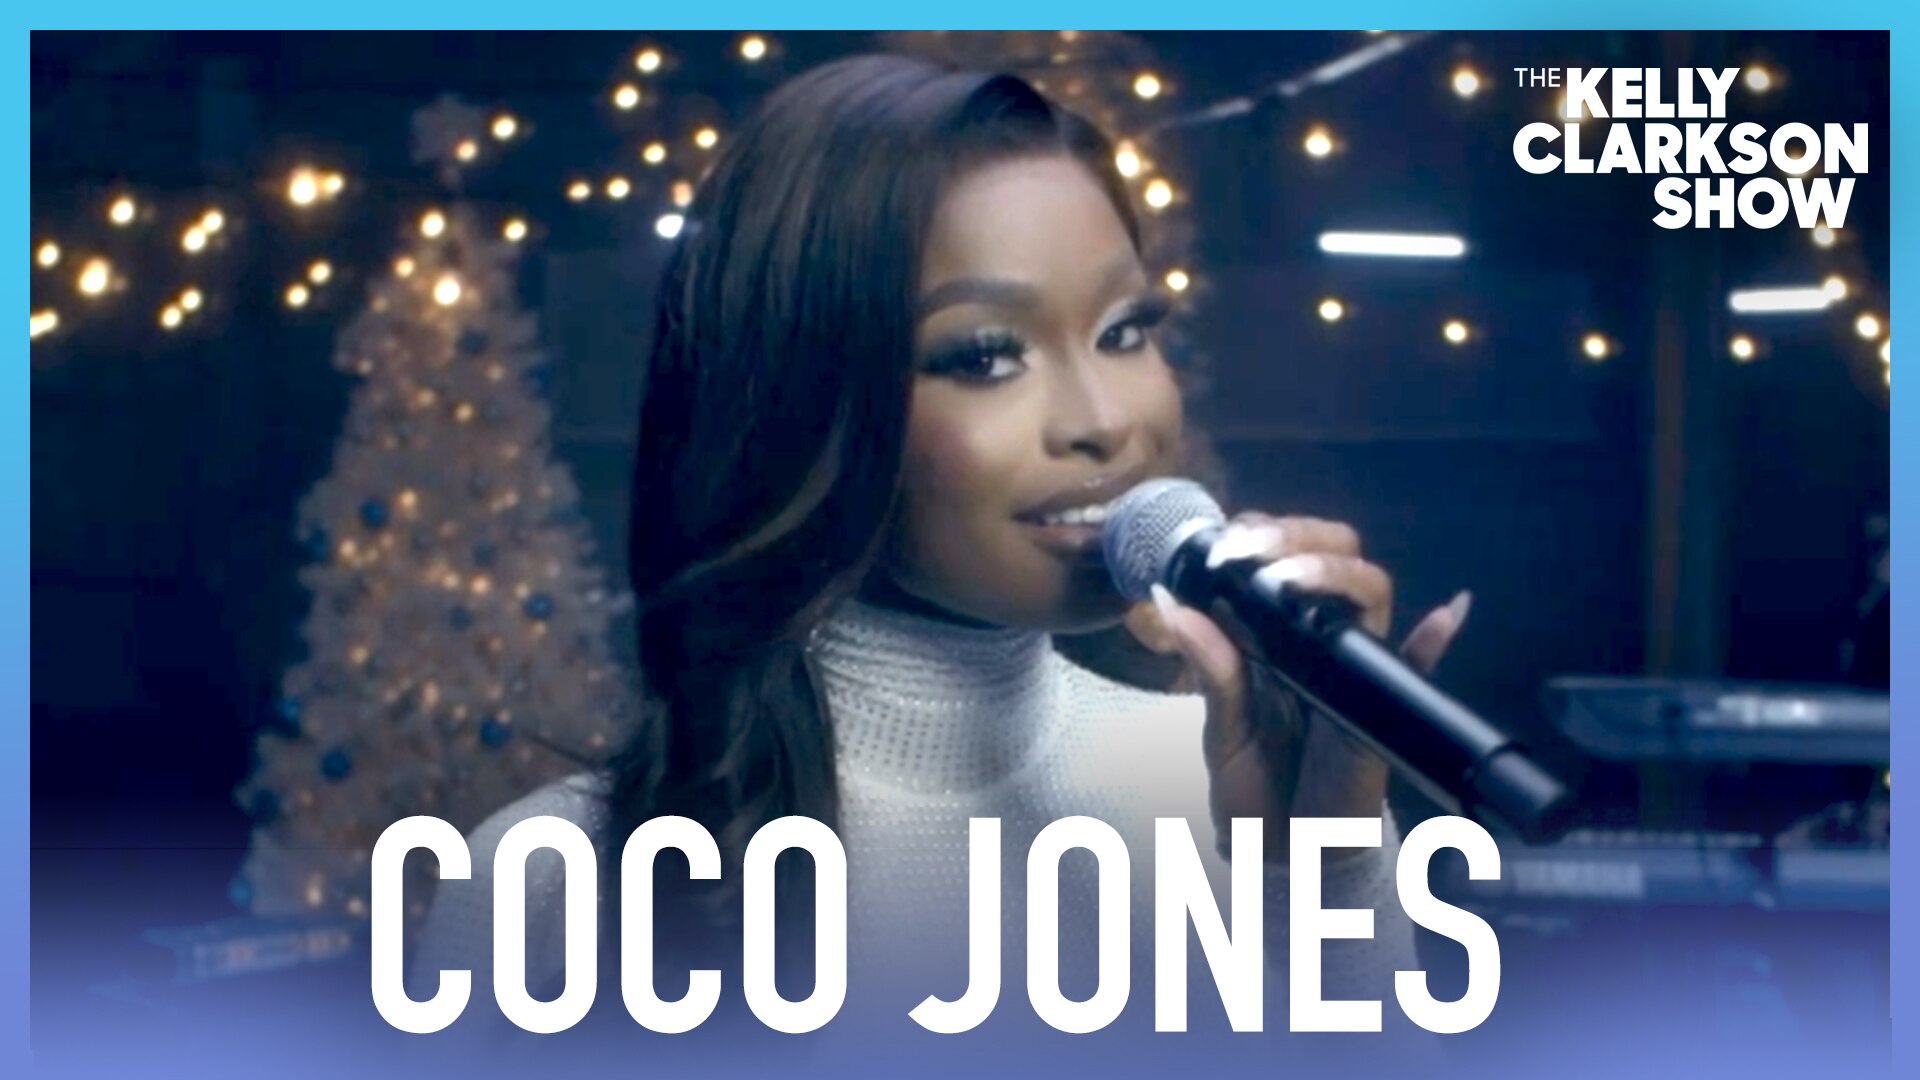 Watch The Kelly Clarkson Show Official Website Highlight Coco Jones